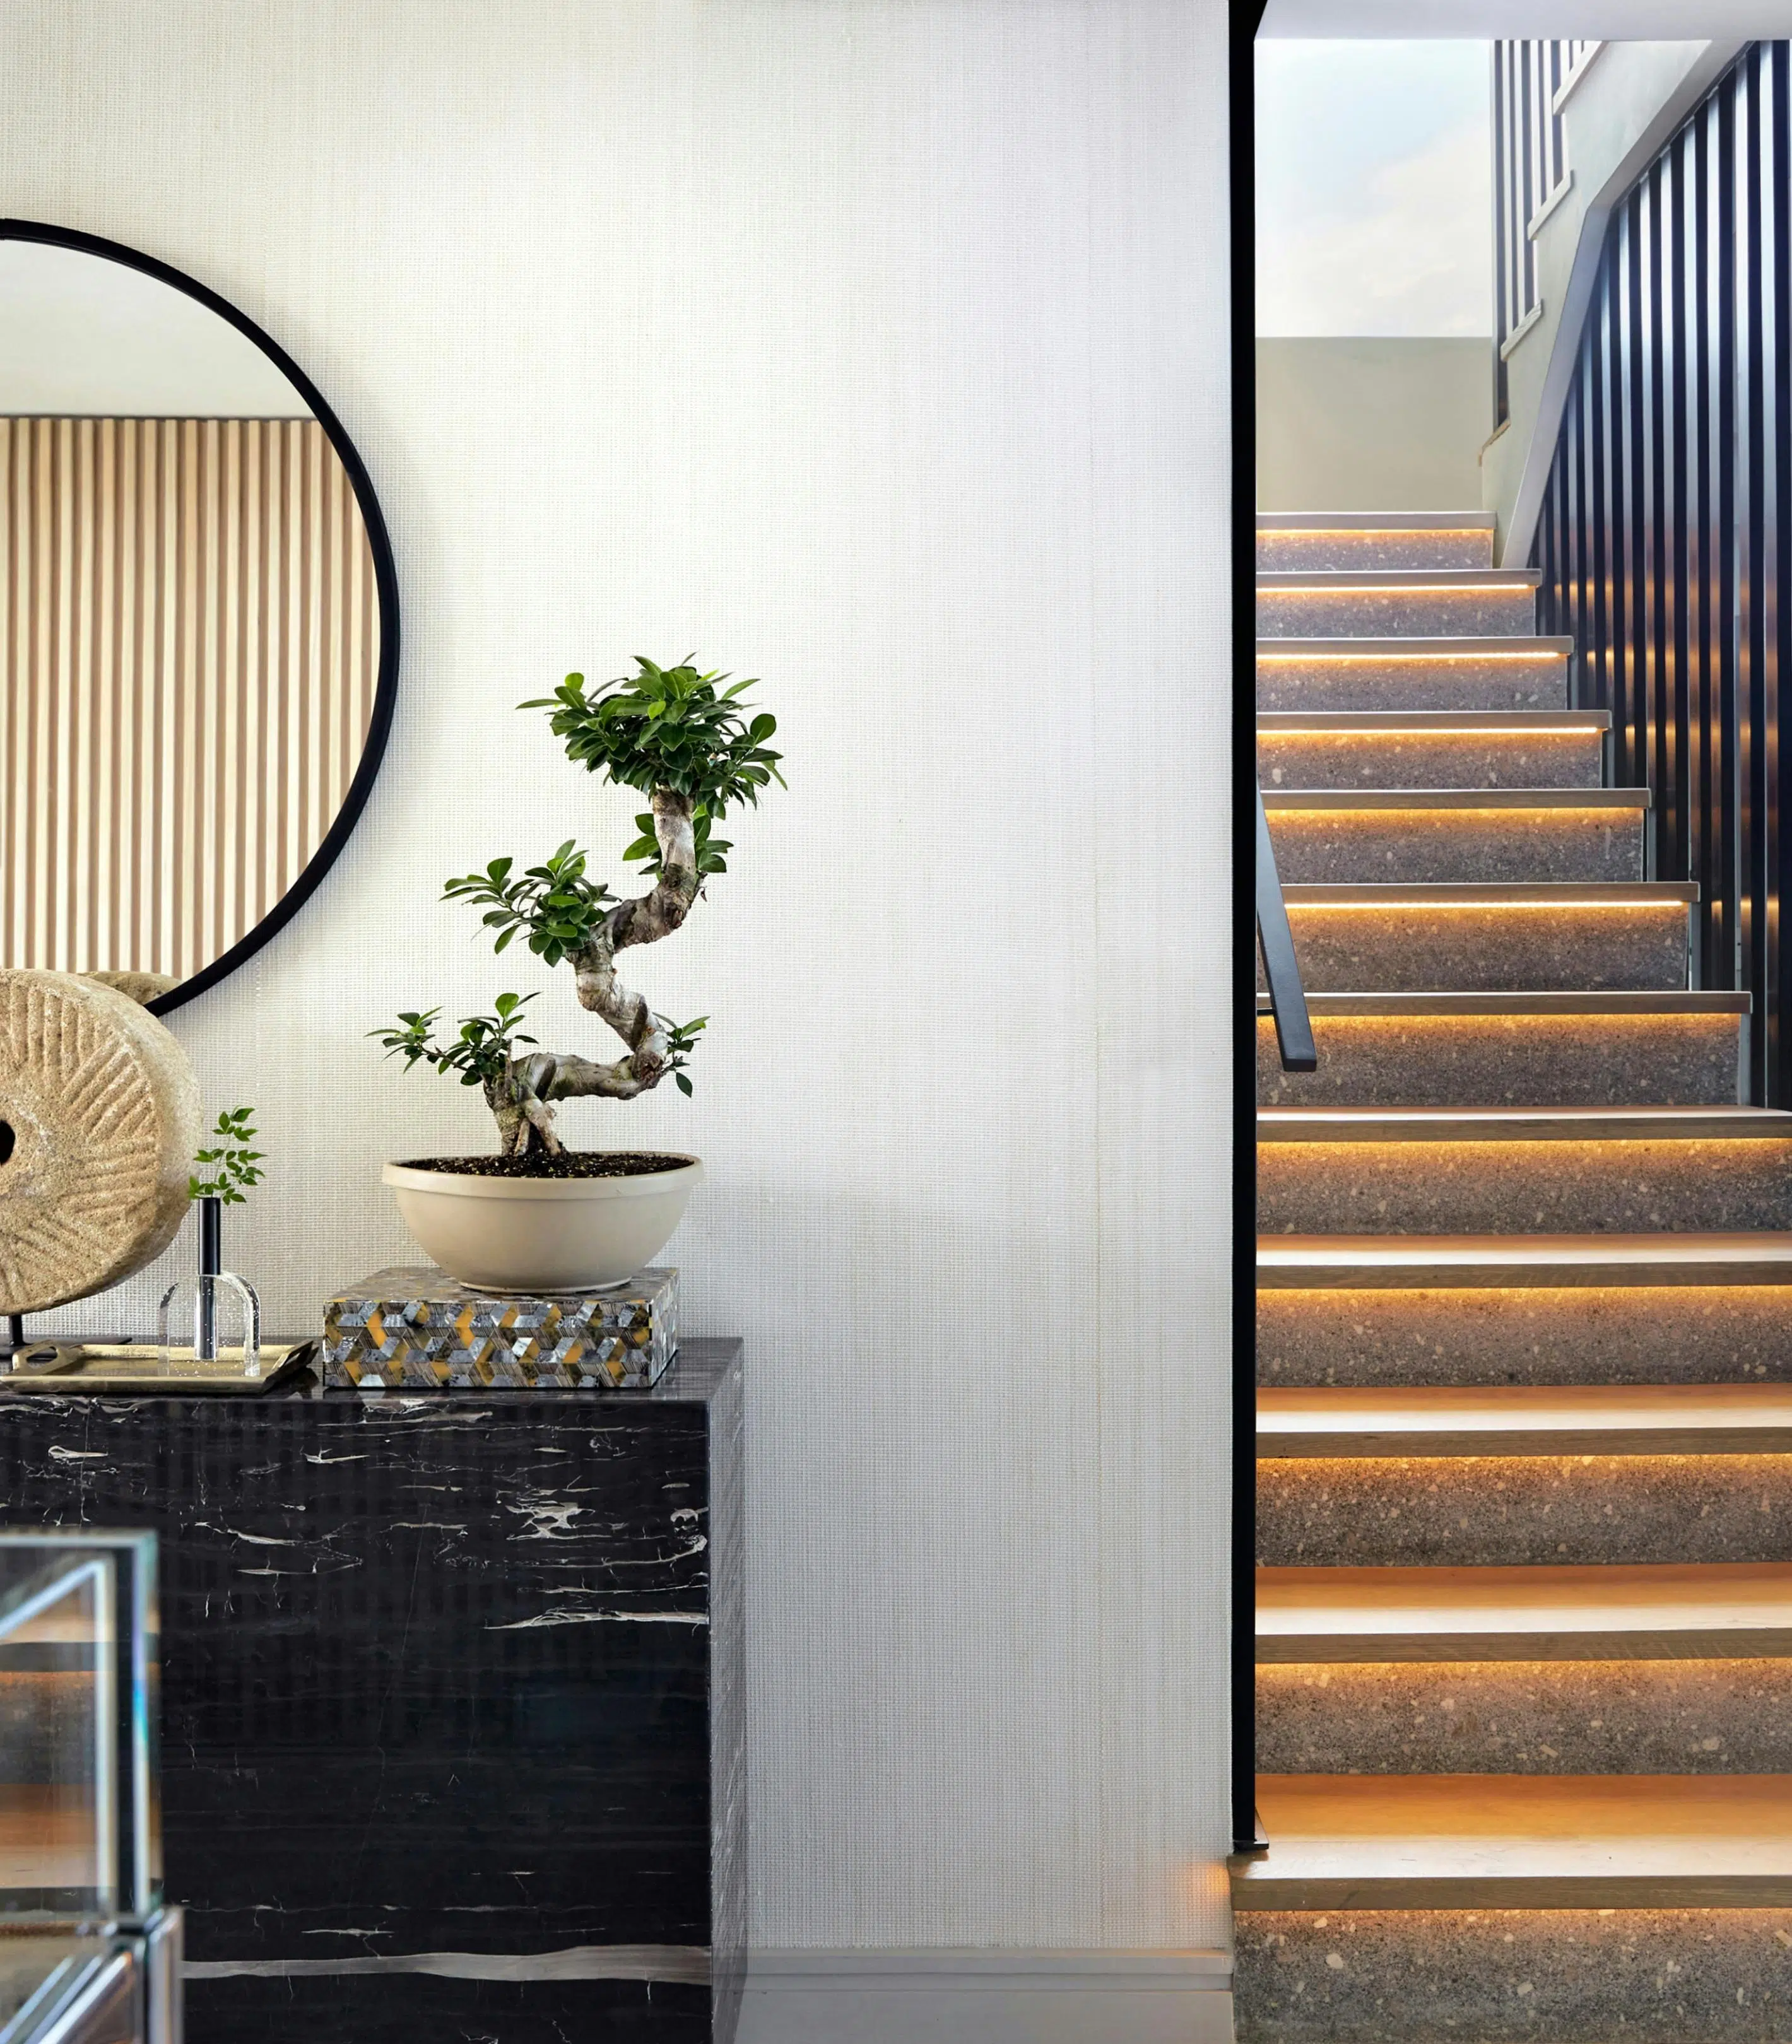 A console table with a bonsai plant atop and a circular mirror on the wall next to a staircase leading upstairs.